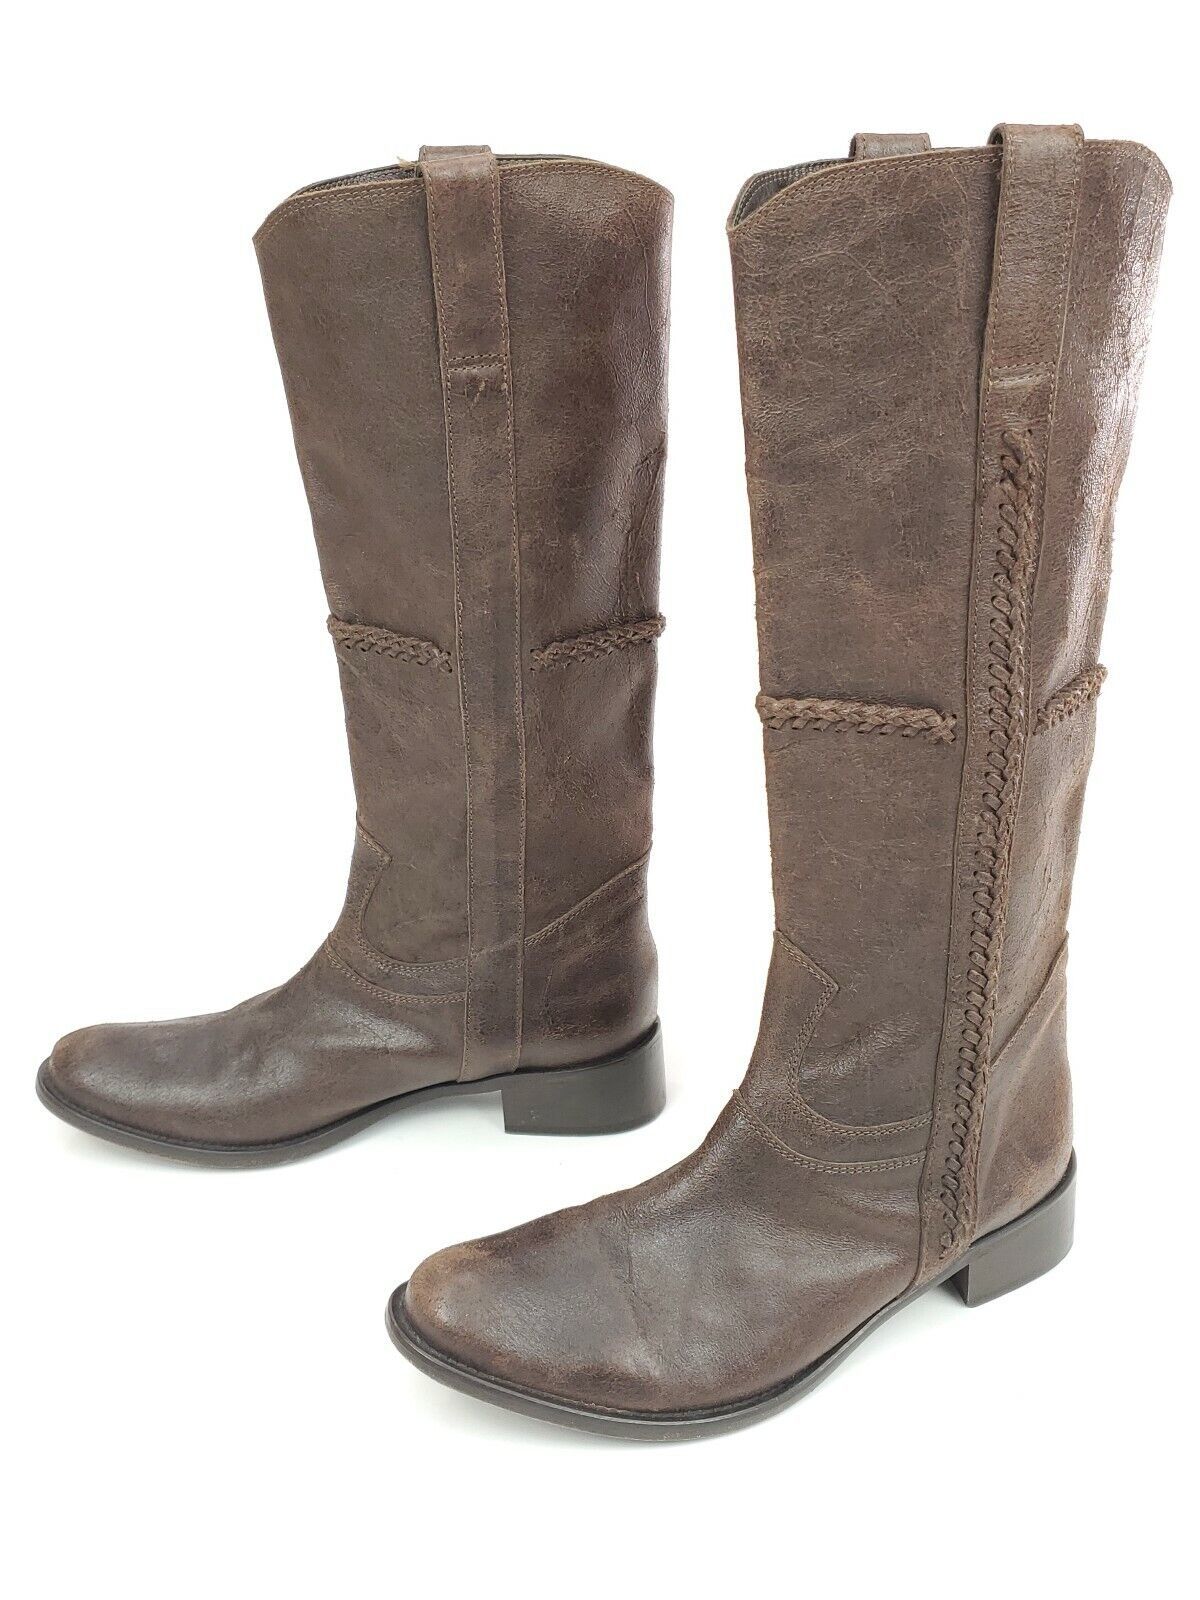 Primary image for Faconnable Size 39.5 US 9 Distressed Brown Leather Knee High Made in Italy